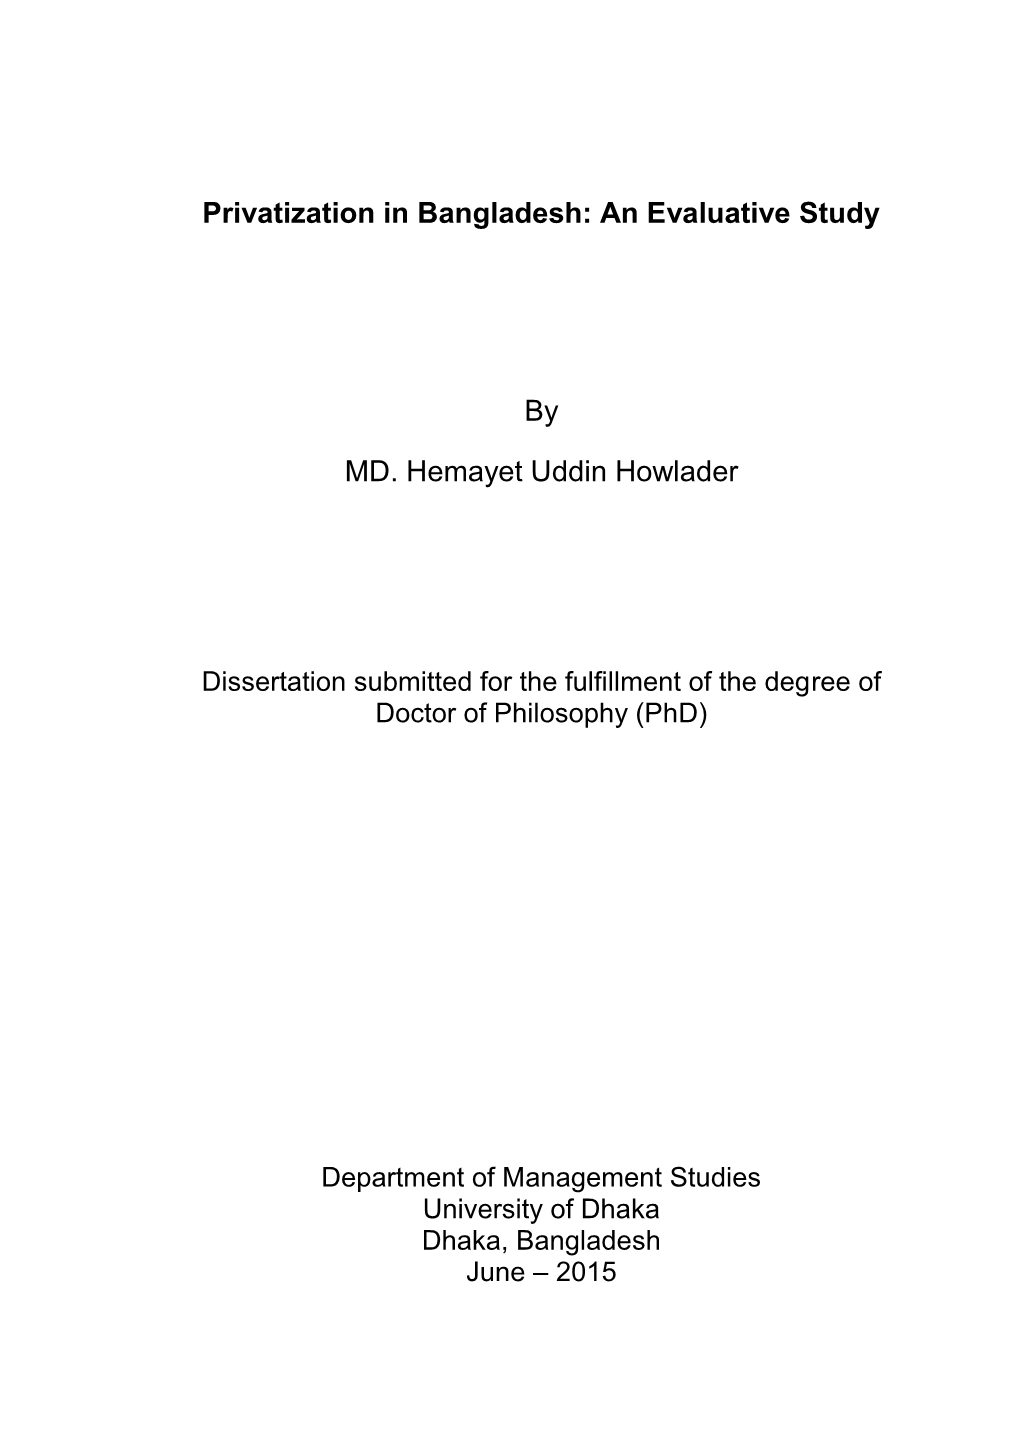 Privatization in Bangladesh: an Evaluative Study by MD. Hemayet